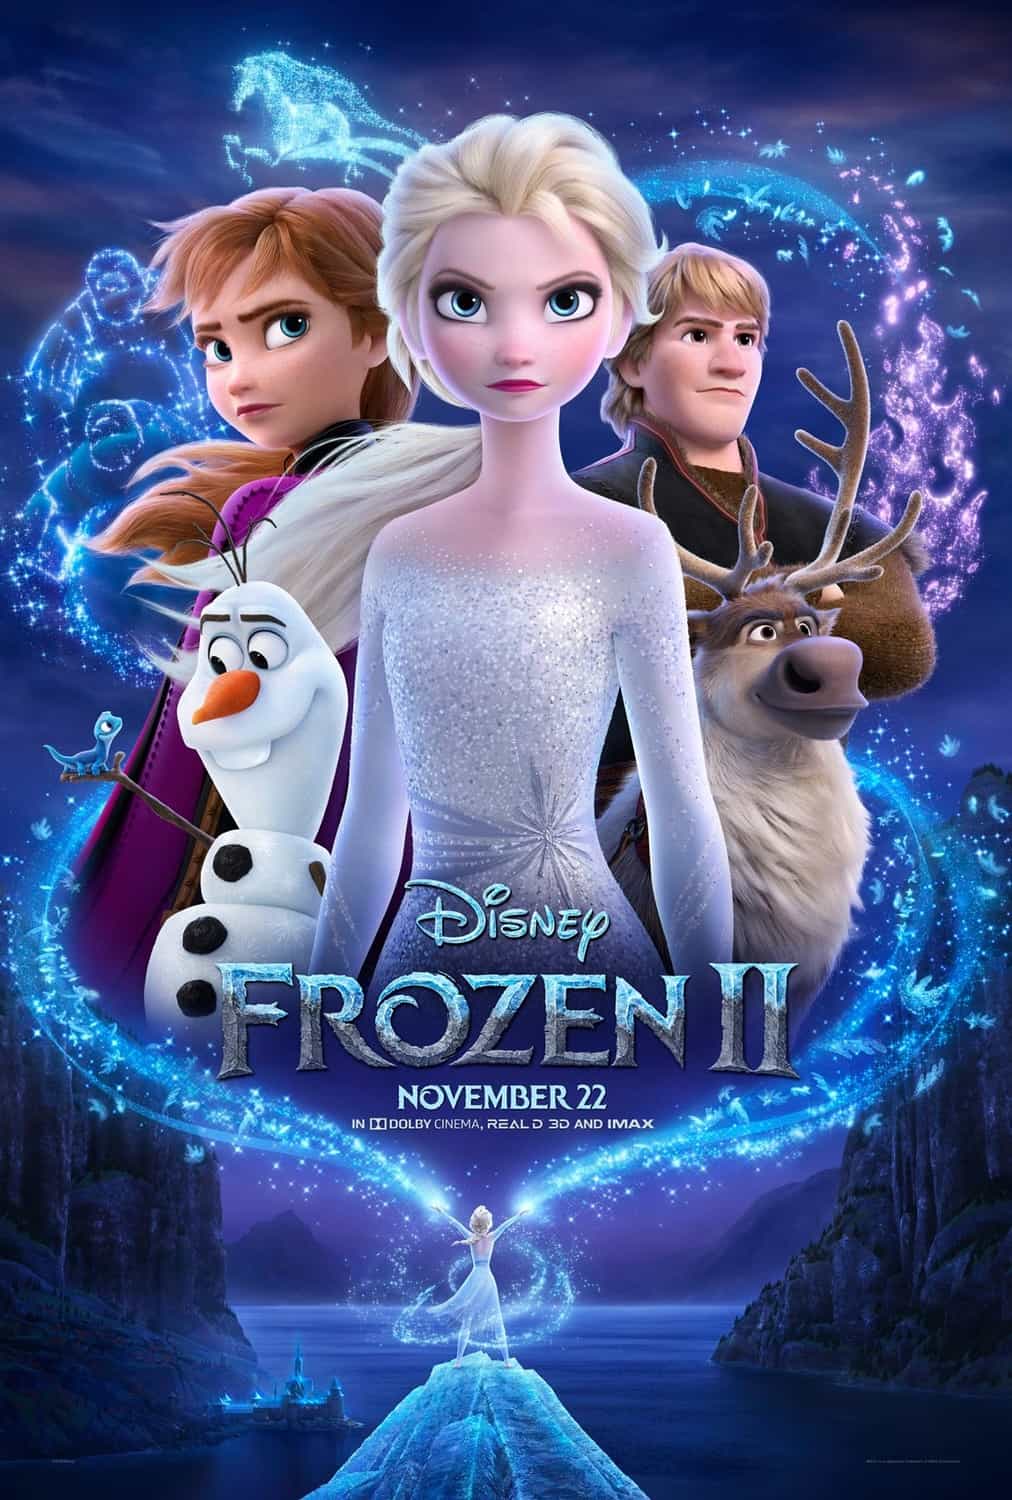 US Box Office Analysis 6 - 8 December 2019:  Frozen II spends a third weekend at the top while there are no new releases on the top 10